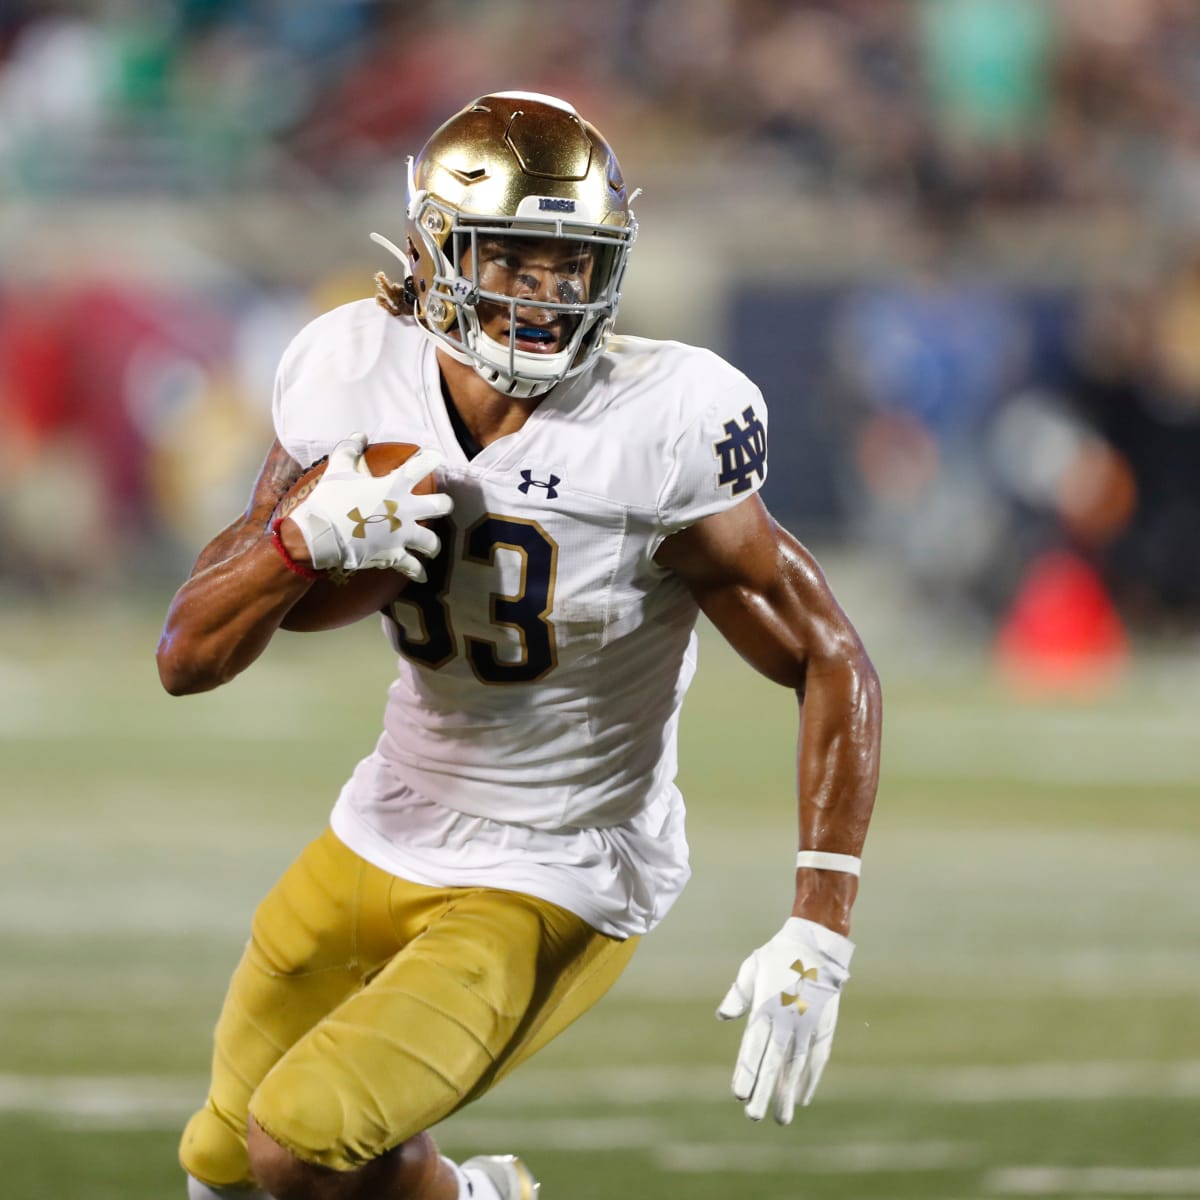 Notre Dame football: Chase Claypool could earn 1st Pro Bowl nod in